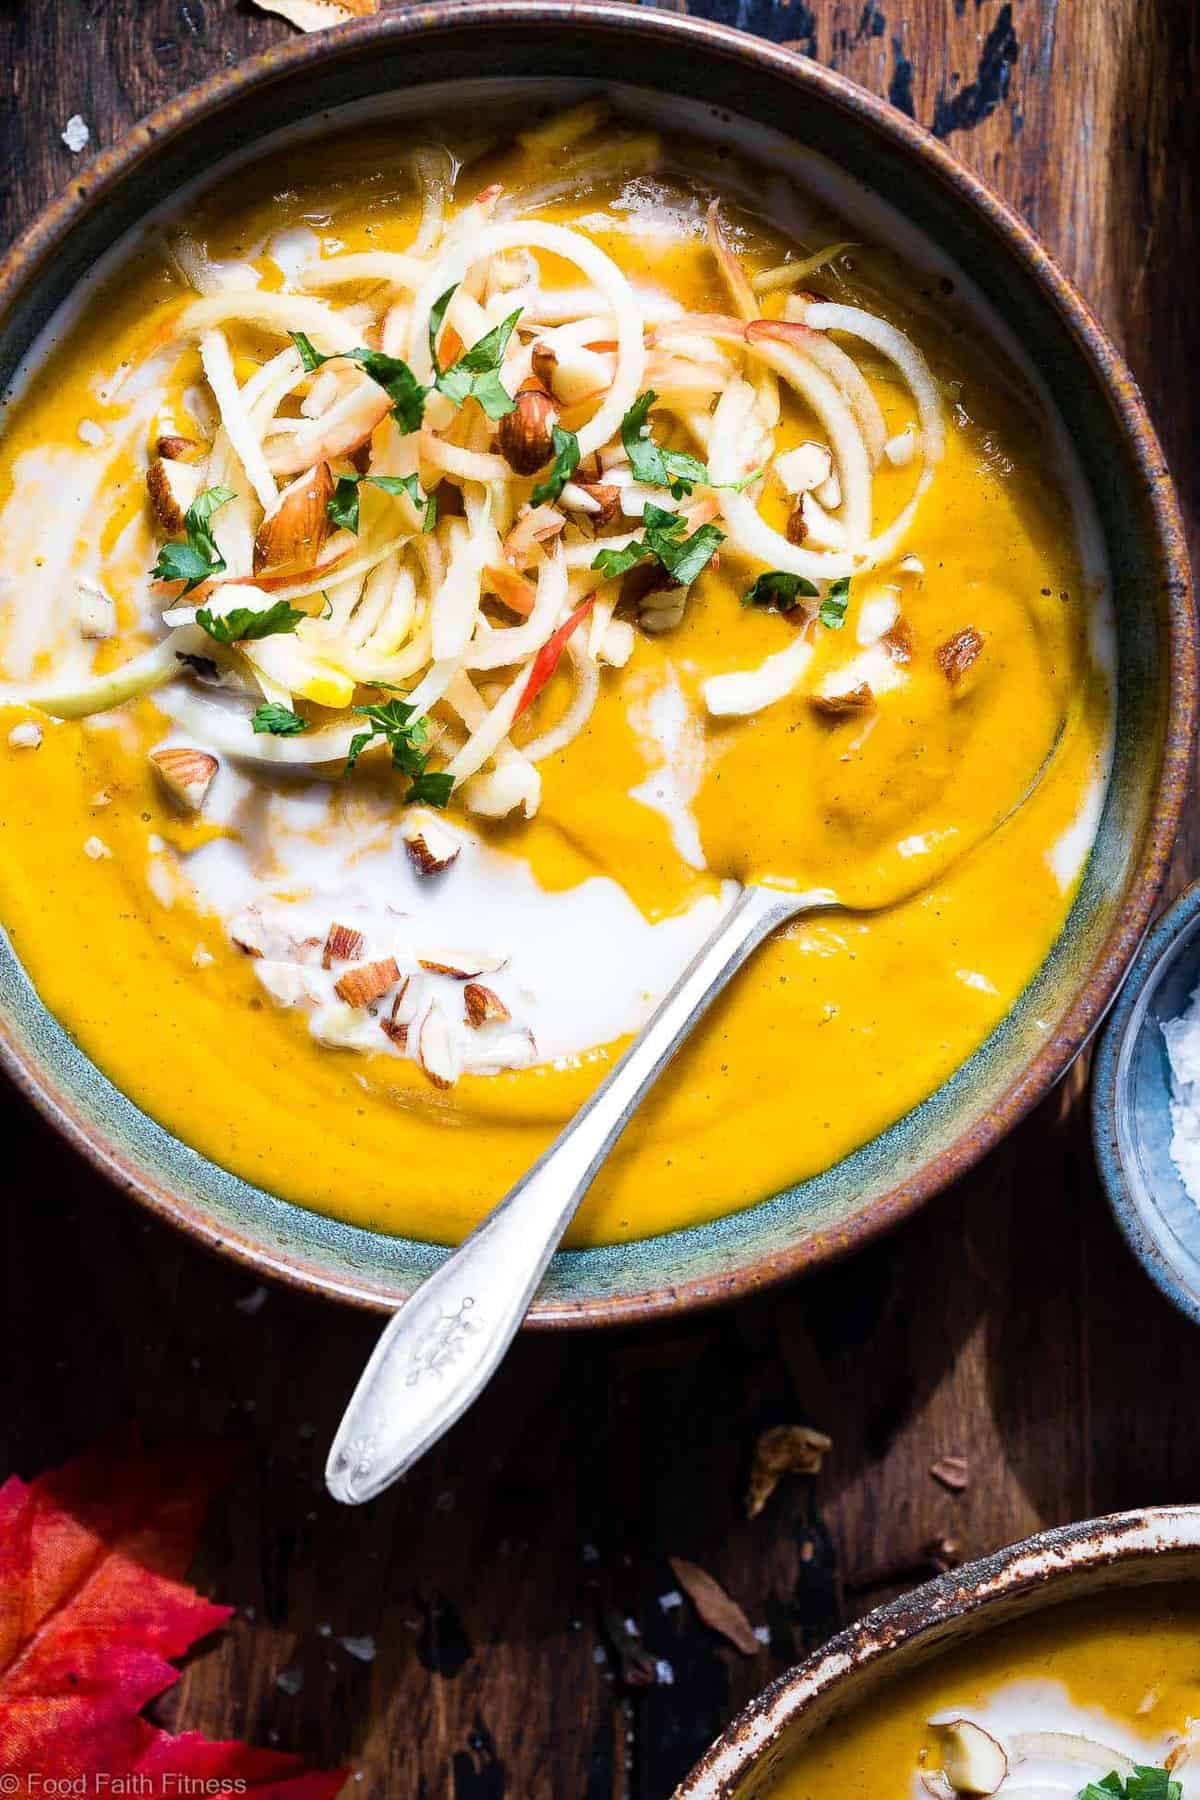 Slow Cooker Creamy Fall Vegan Sweet Potato Soup - this healthy sweet potato soup is made in the slow cooker for an EASY weeknight dinner that is loaded with spicy-sweet, cozy flavor! Gluten free, paleo and SO creamy and delicious! | #Foodfaithfitness | #Paleo #Glutenfree #Vegan #Dairyfree #slowcooker